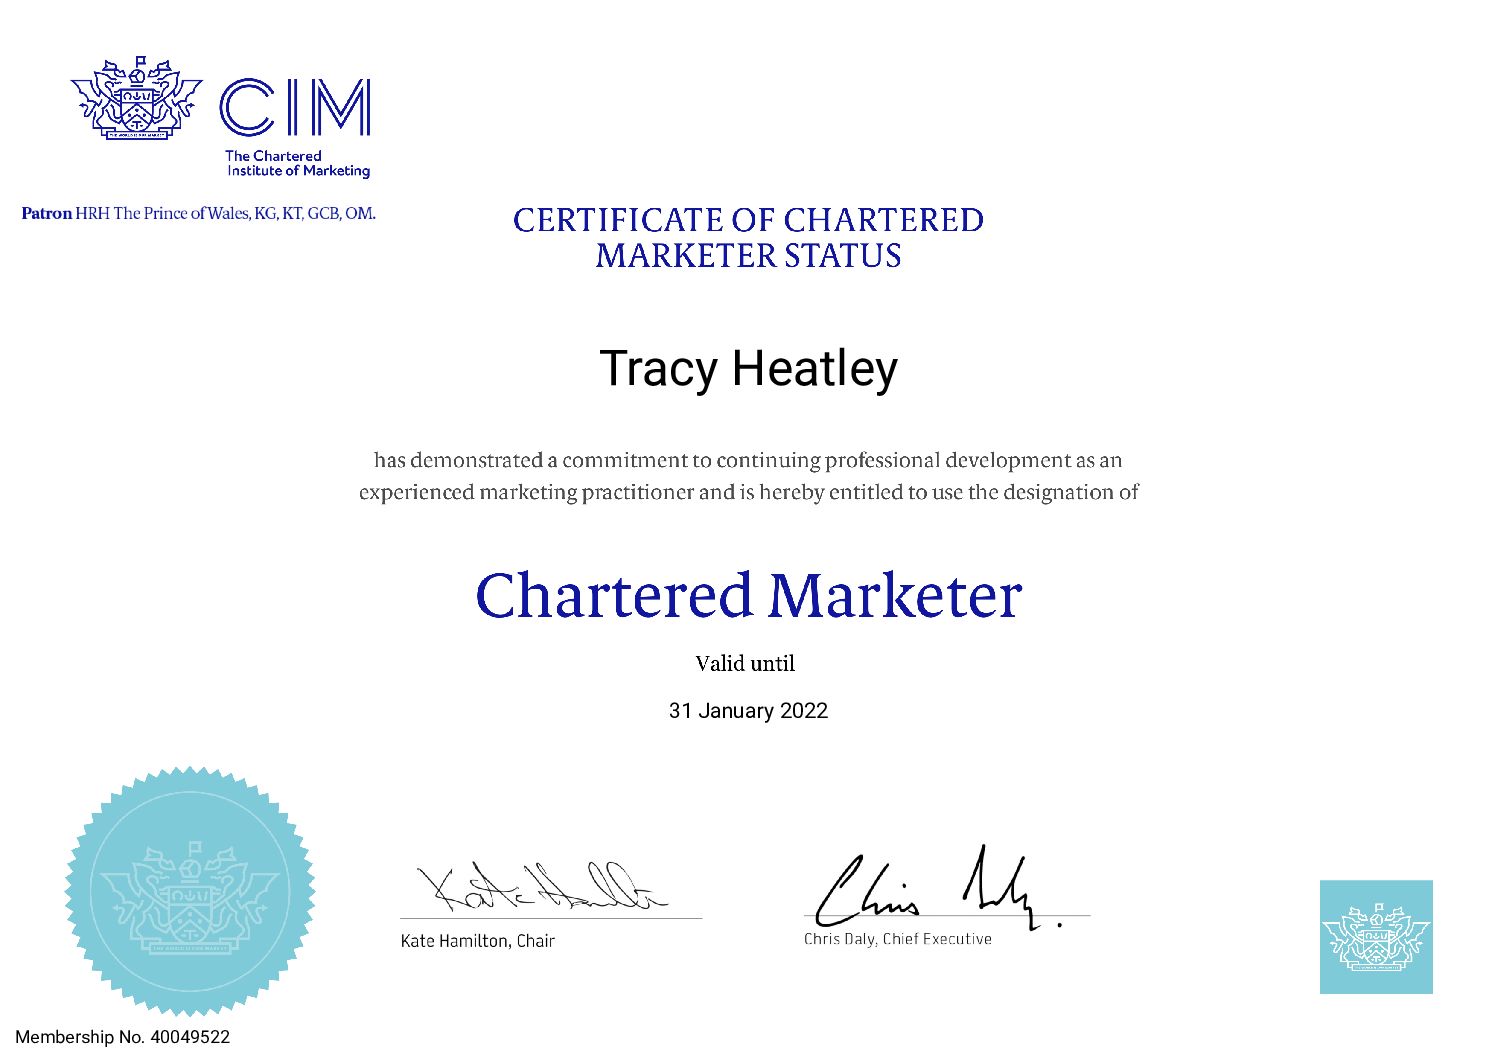 Tracy Heatley Chartered Marketer